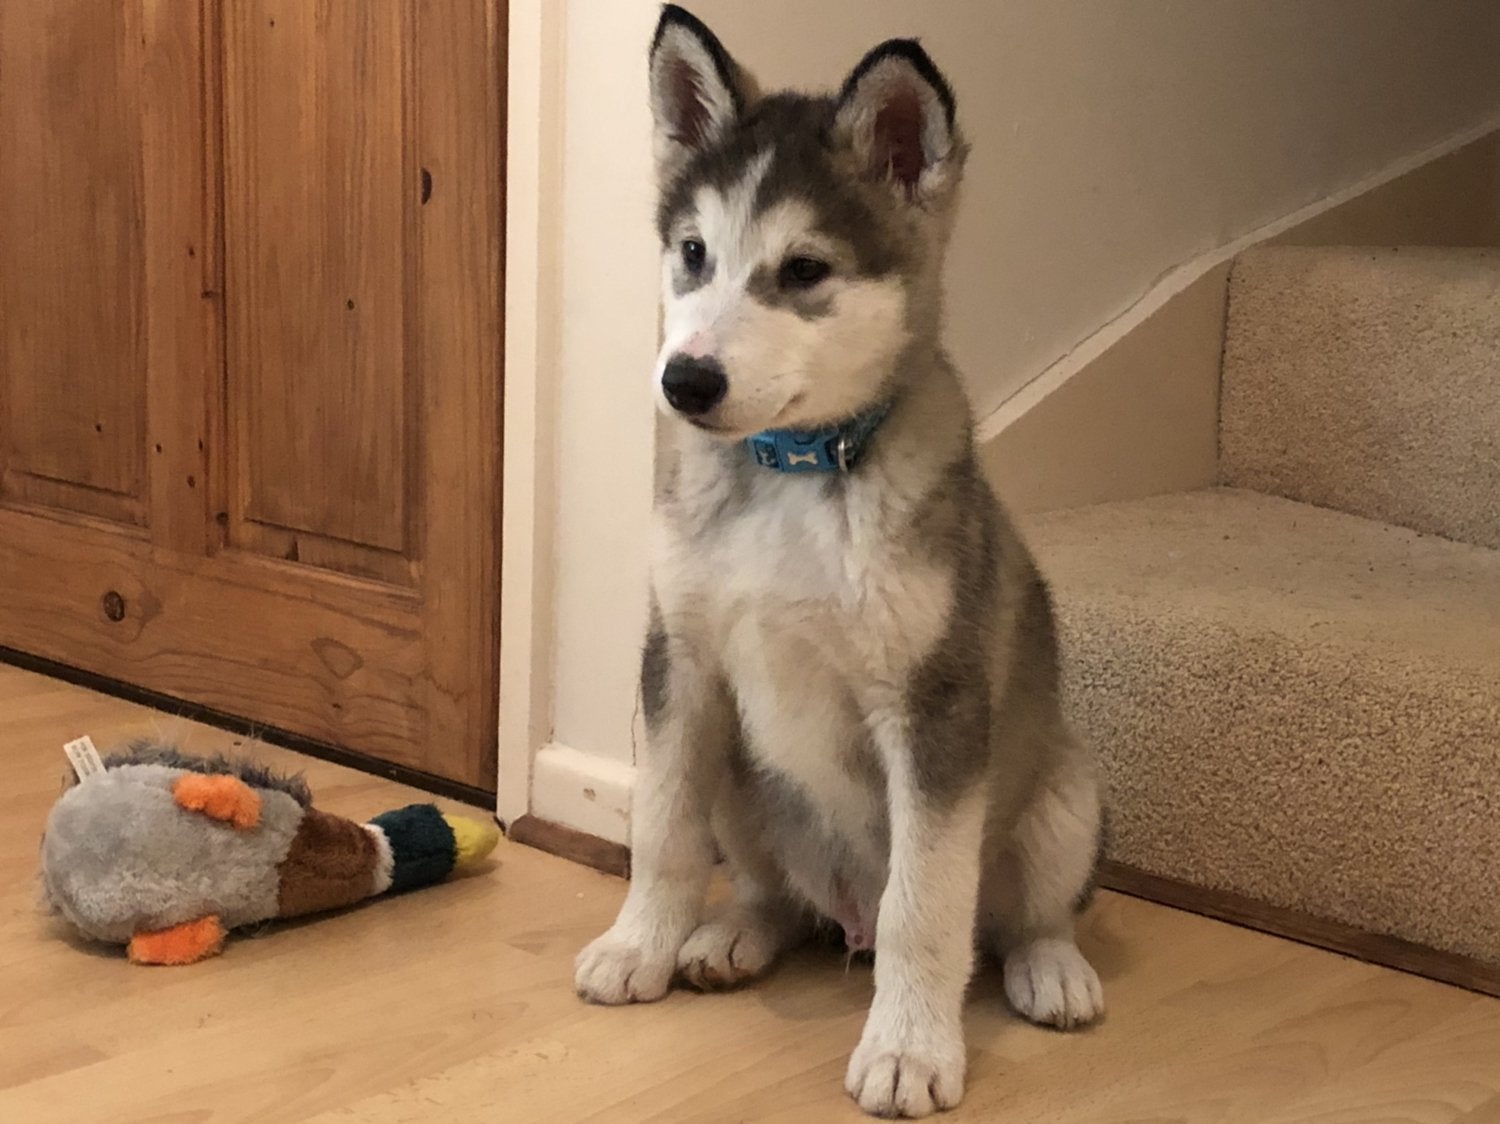 A Siberian Husky puppy sitting on the floor with the stairway behind him